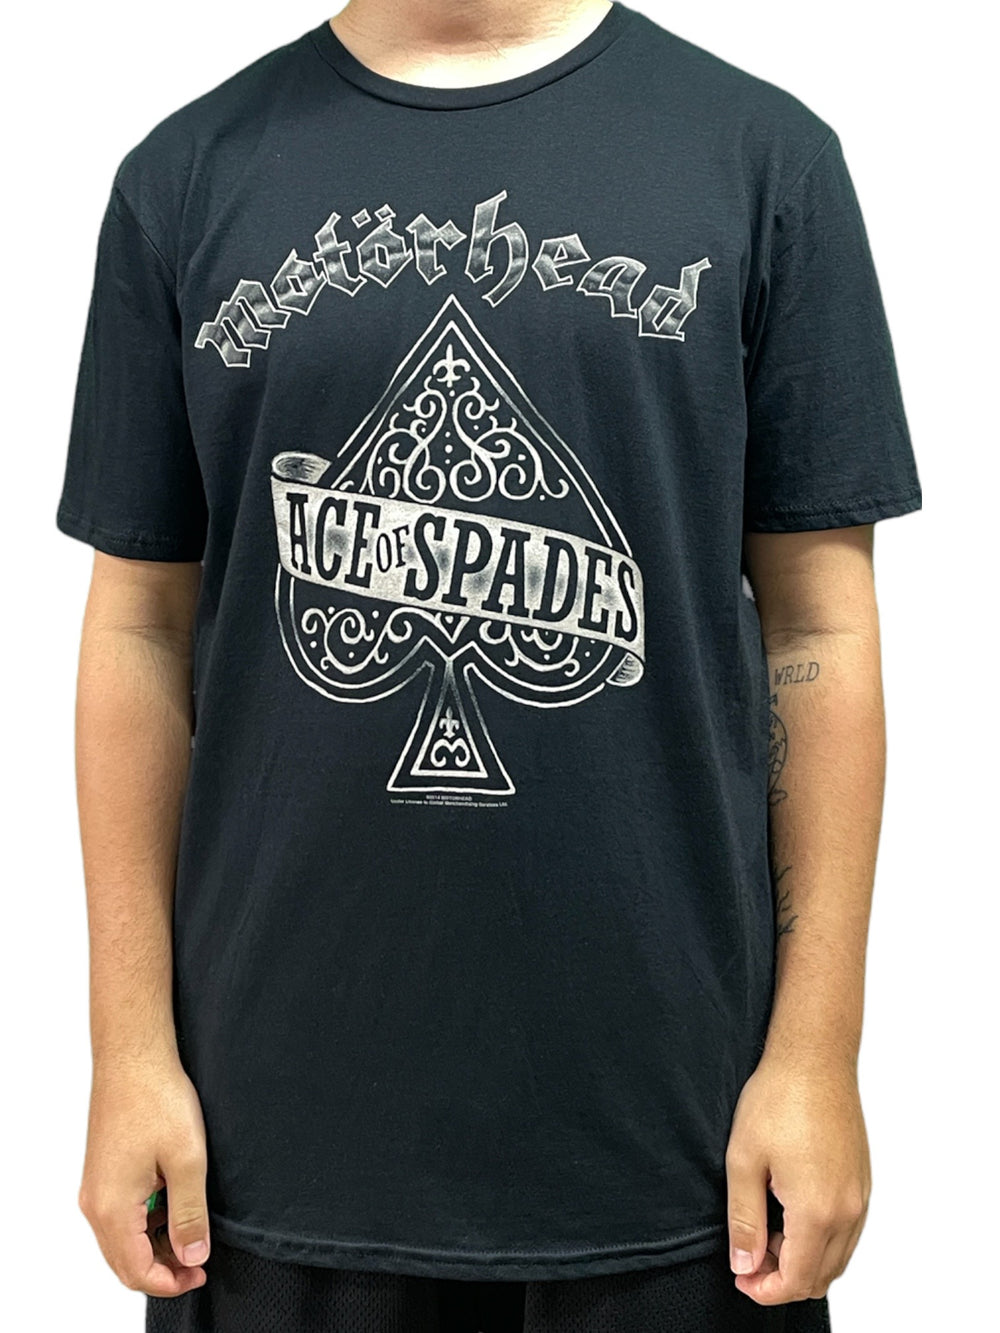 Motorhead Ace Of Spades Official Unisex T Shirt Brand New Various Sizes